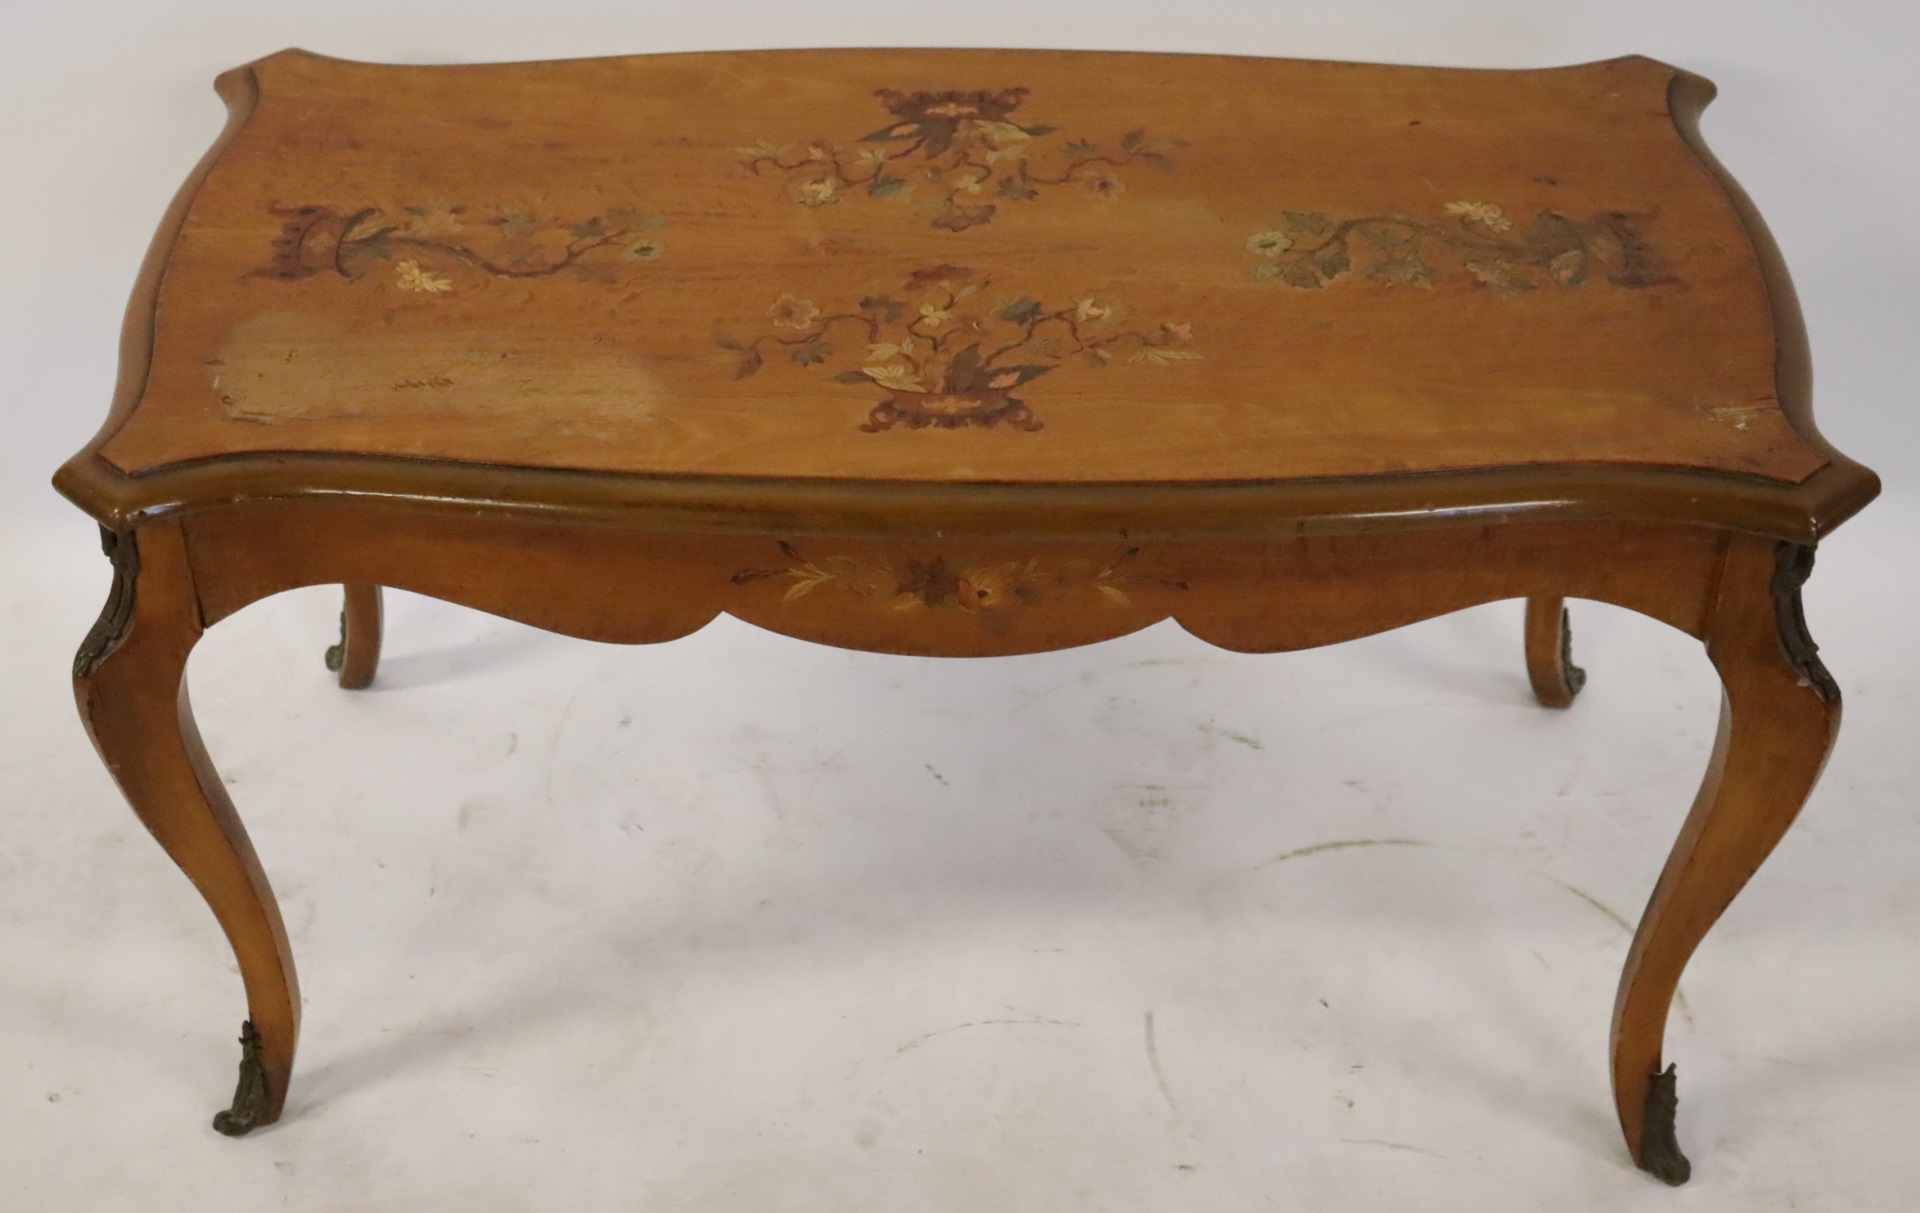 ANTIQUE GALLE STYLE INLAID LOUIS